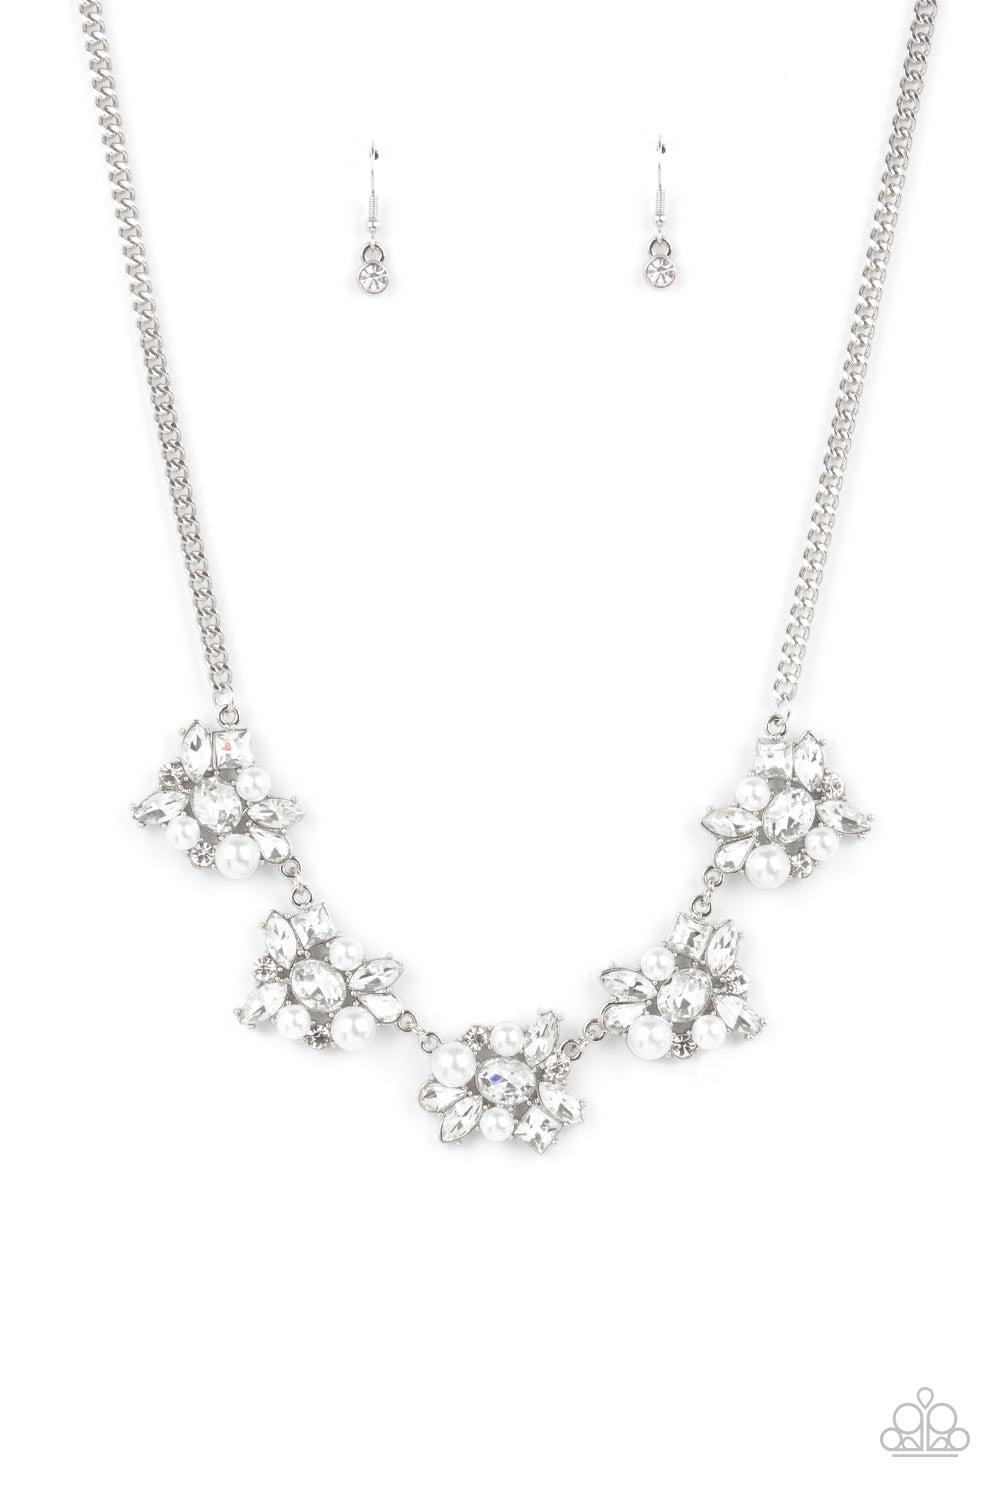 HEIRESS of Them All Necklace - White